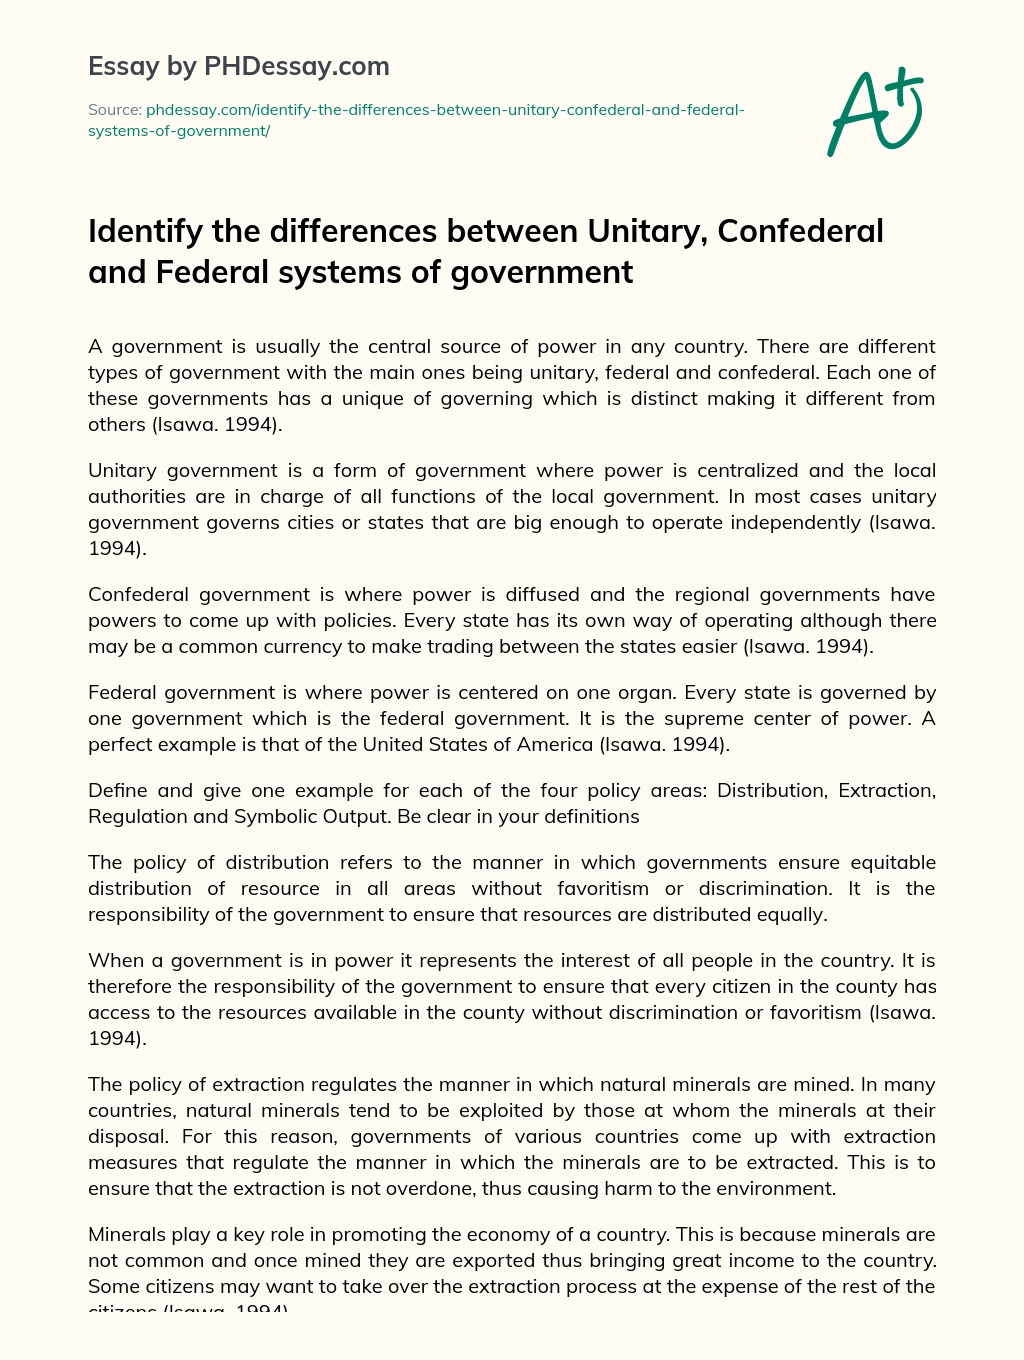 Identify the differences between Unitary, Confederal and Federal systems of government essay